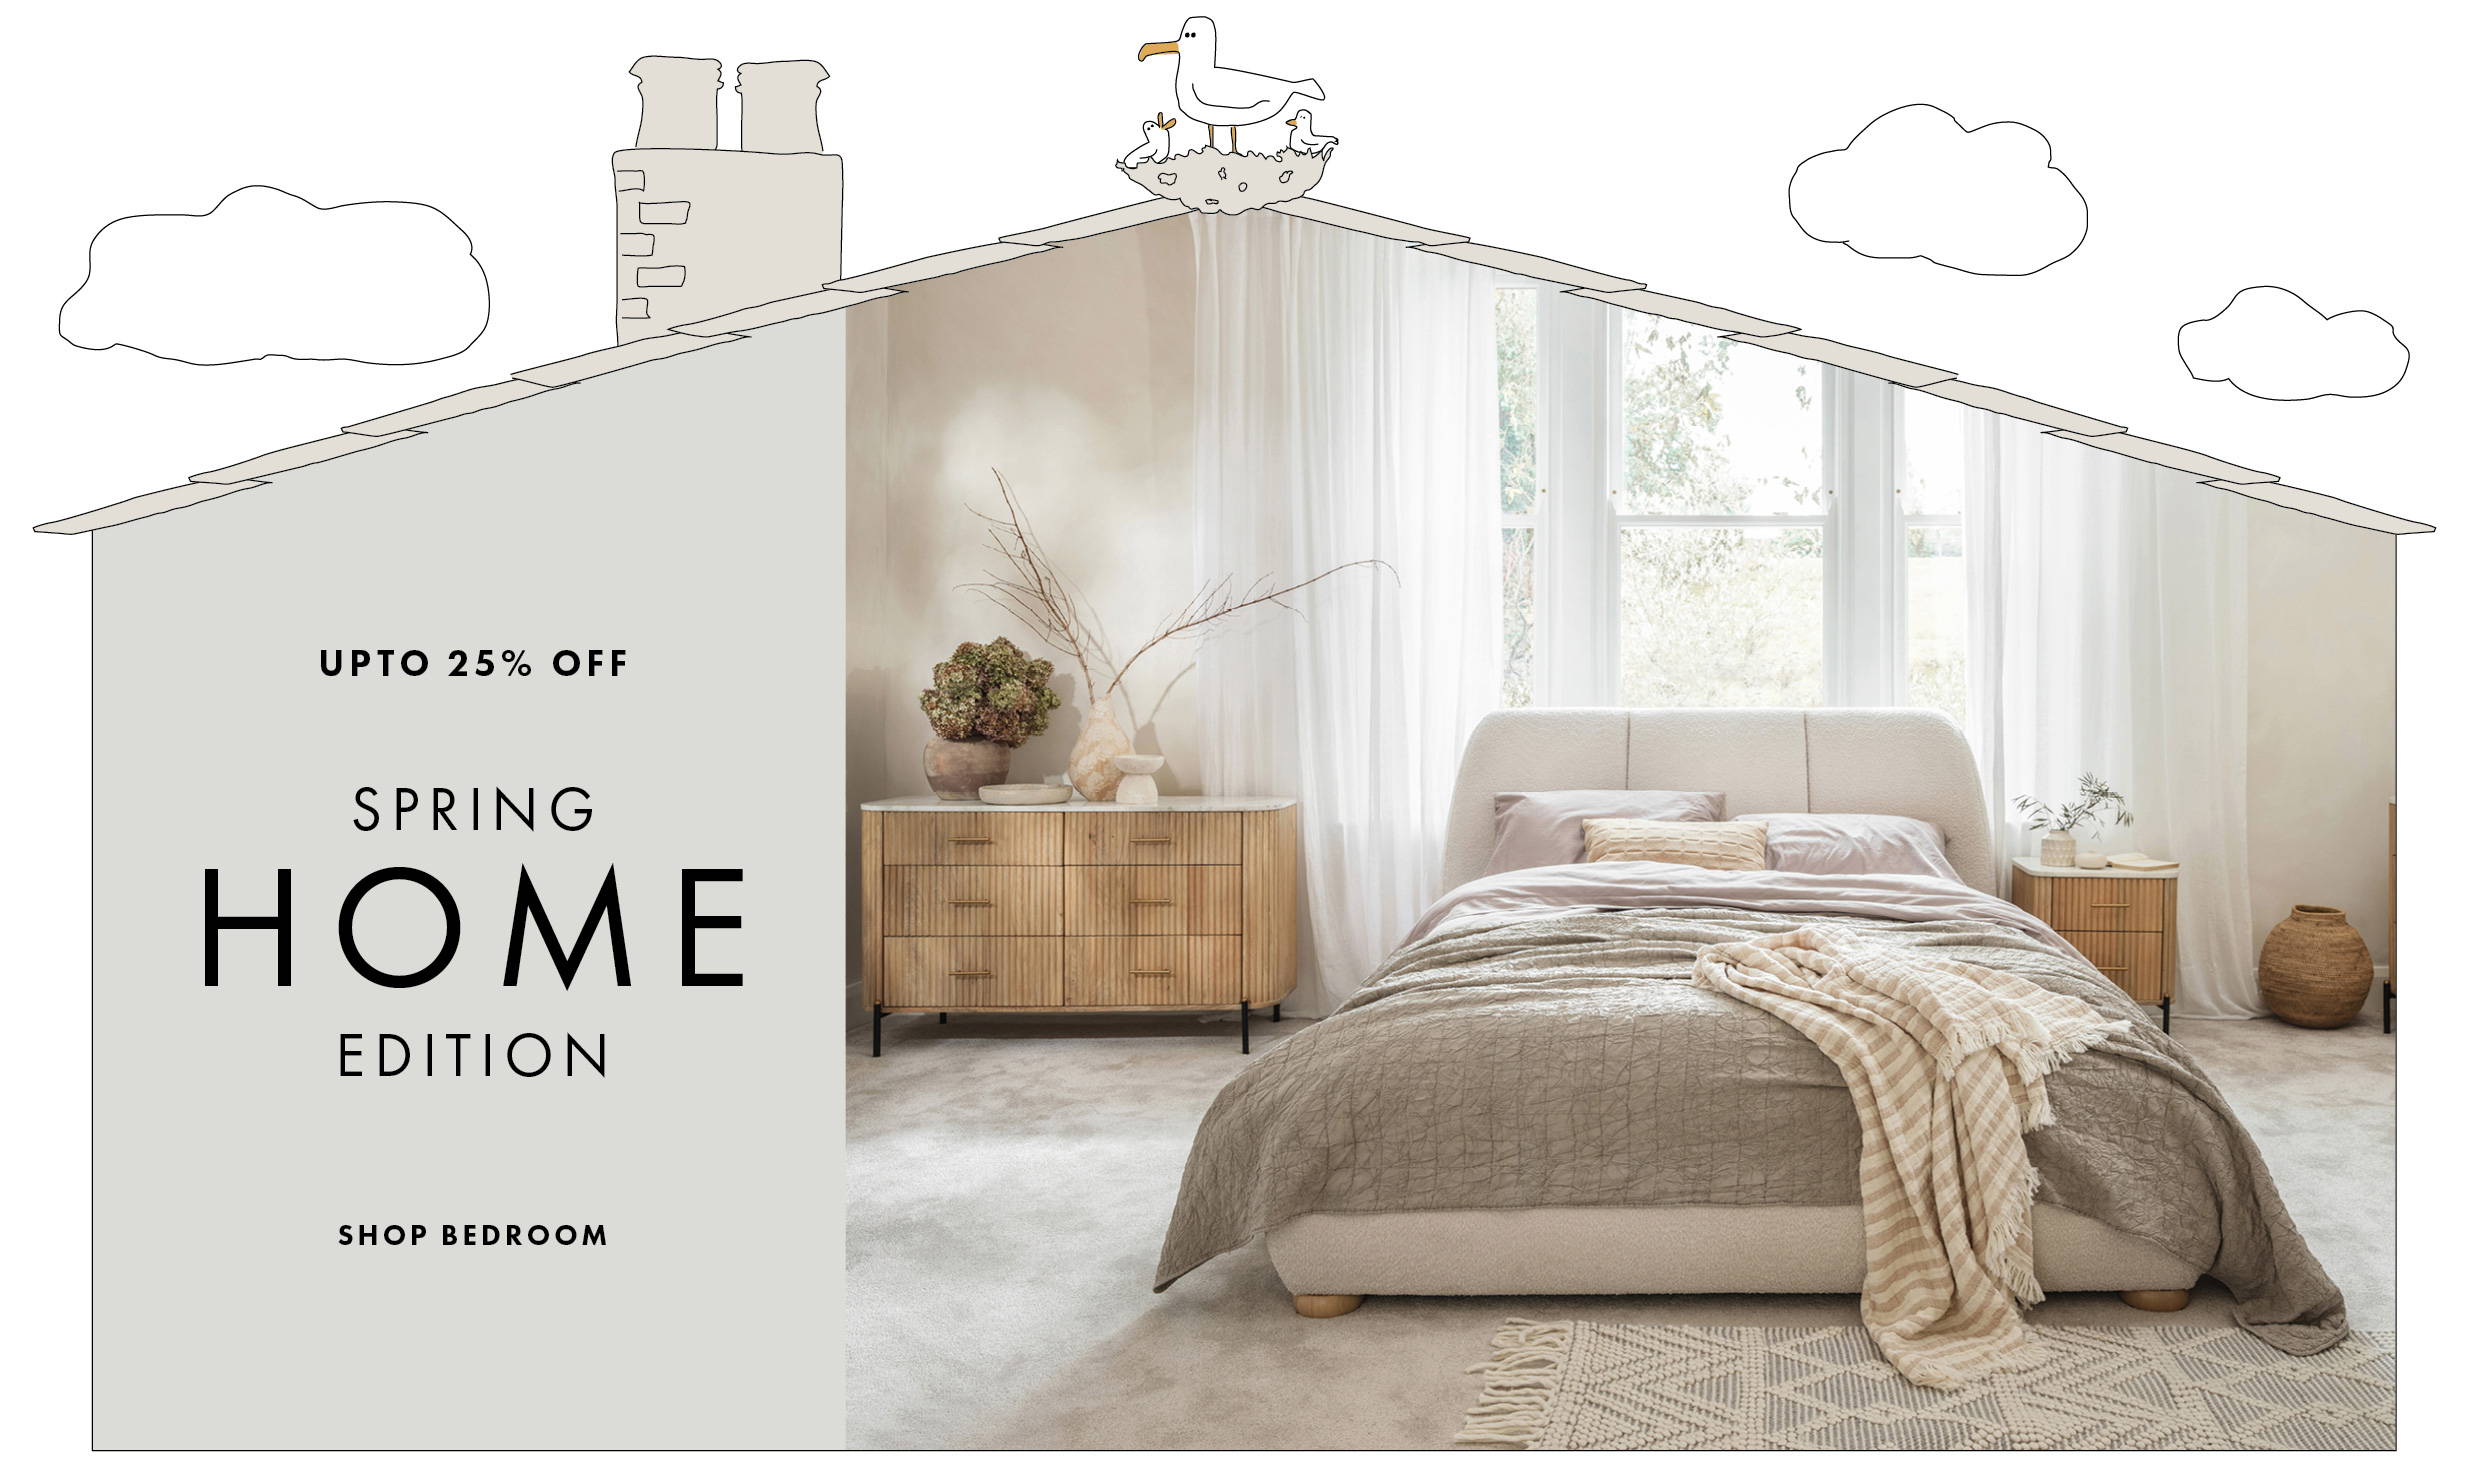 Spring Home Edition Now On At BF Home In Norwich